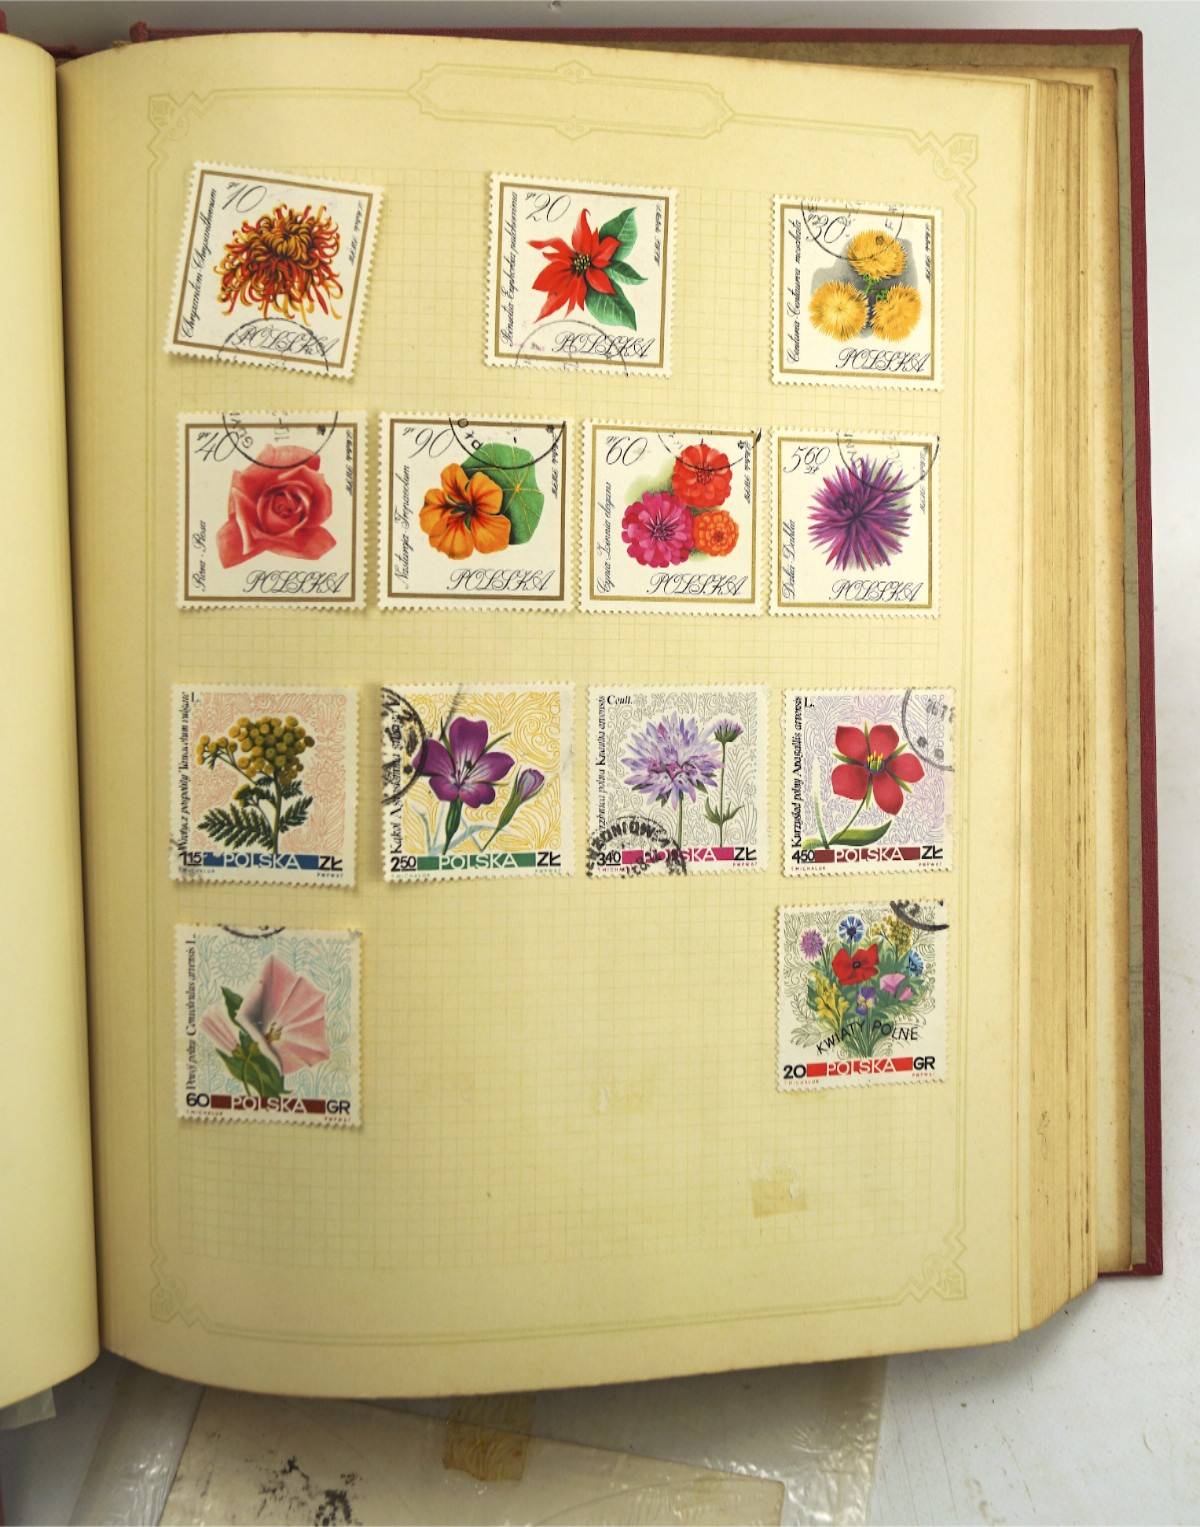 A Stanley Gibbons stamp album containing a collection of mostly GB stamps, Victorian and later, - Image 2 of 3